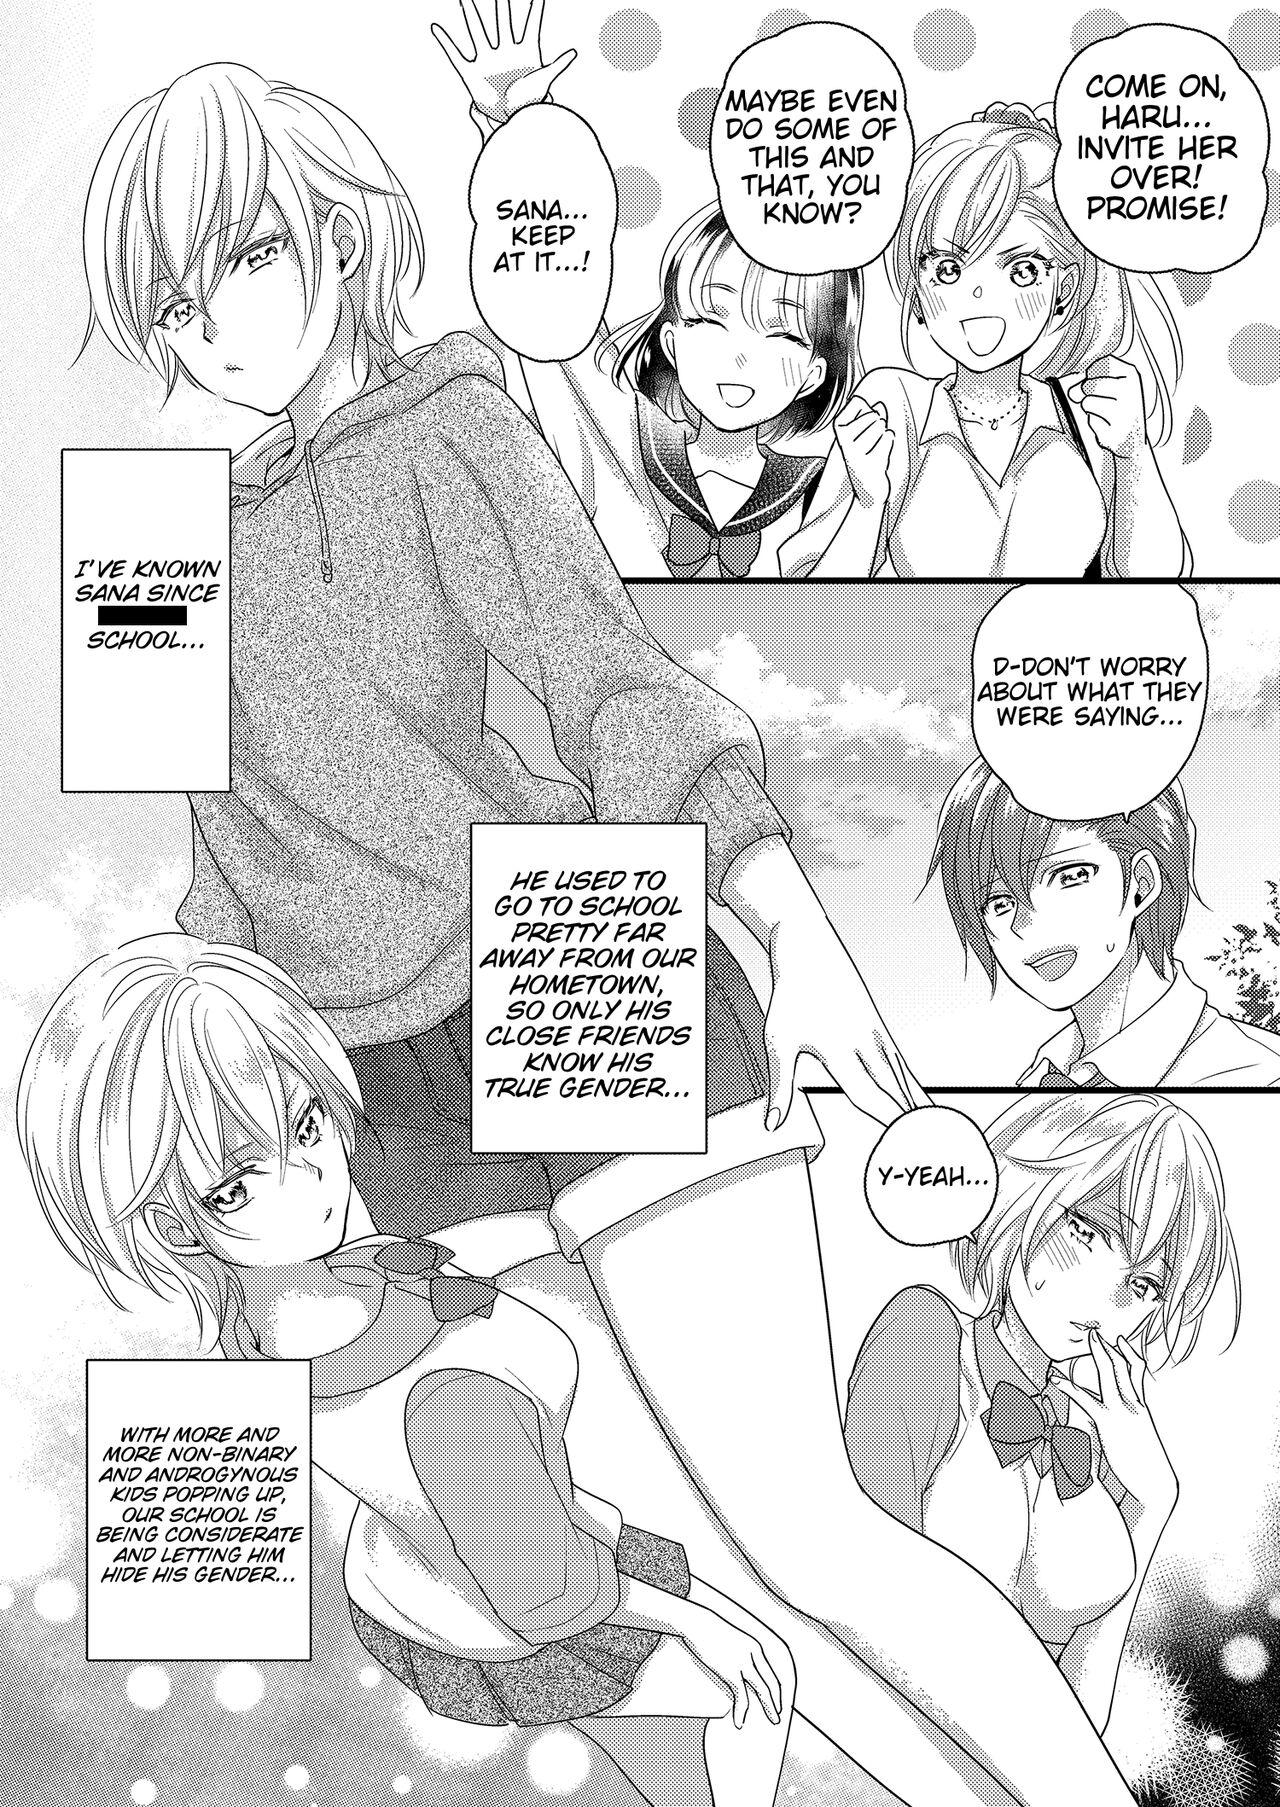 Perverted Haru and Sana ～Love Connected Through Cosplay～ - Original Culo - Page 4